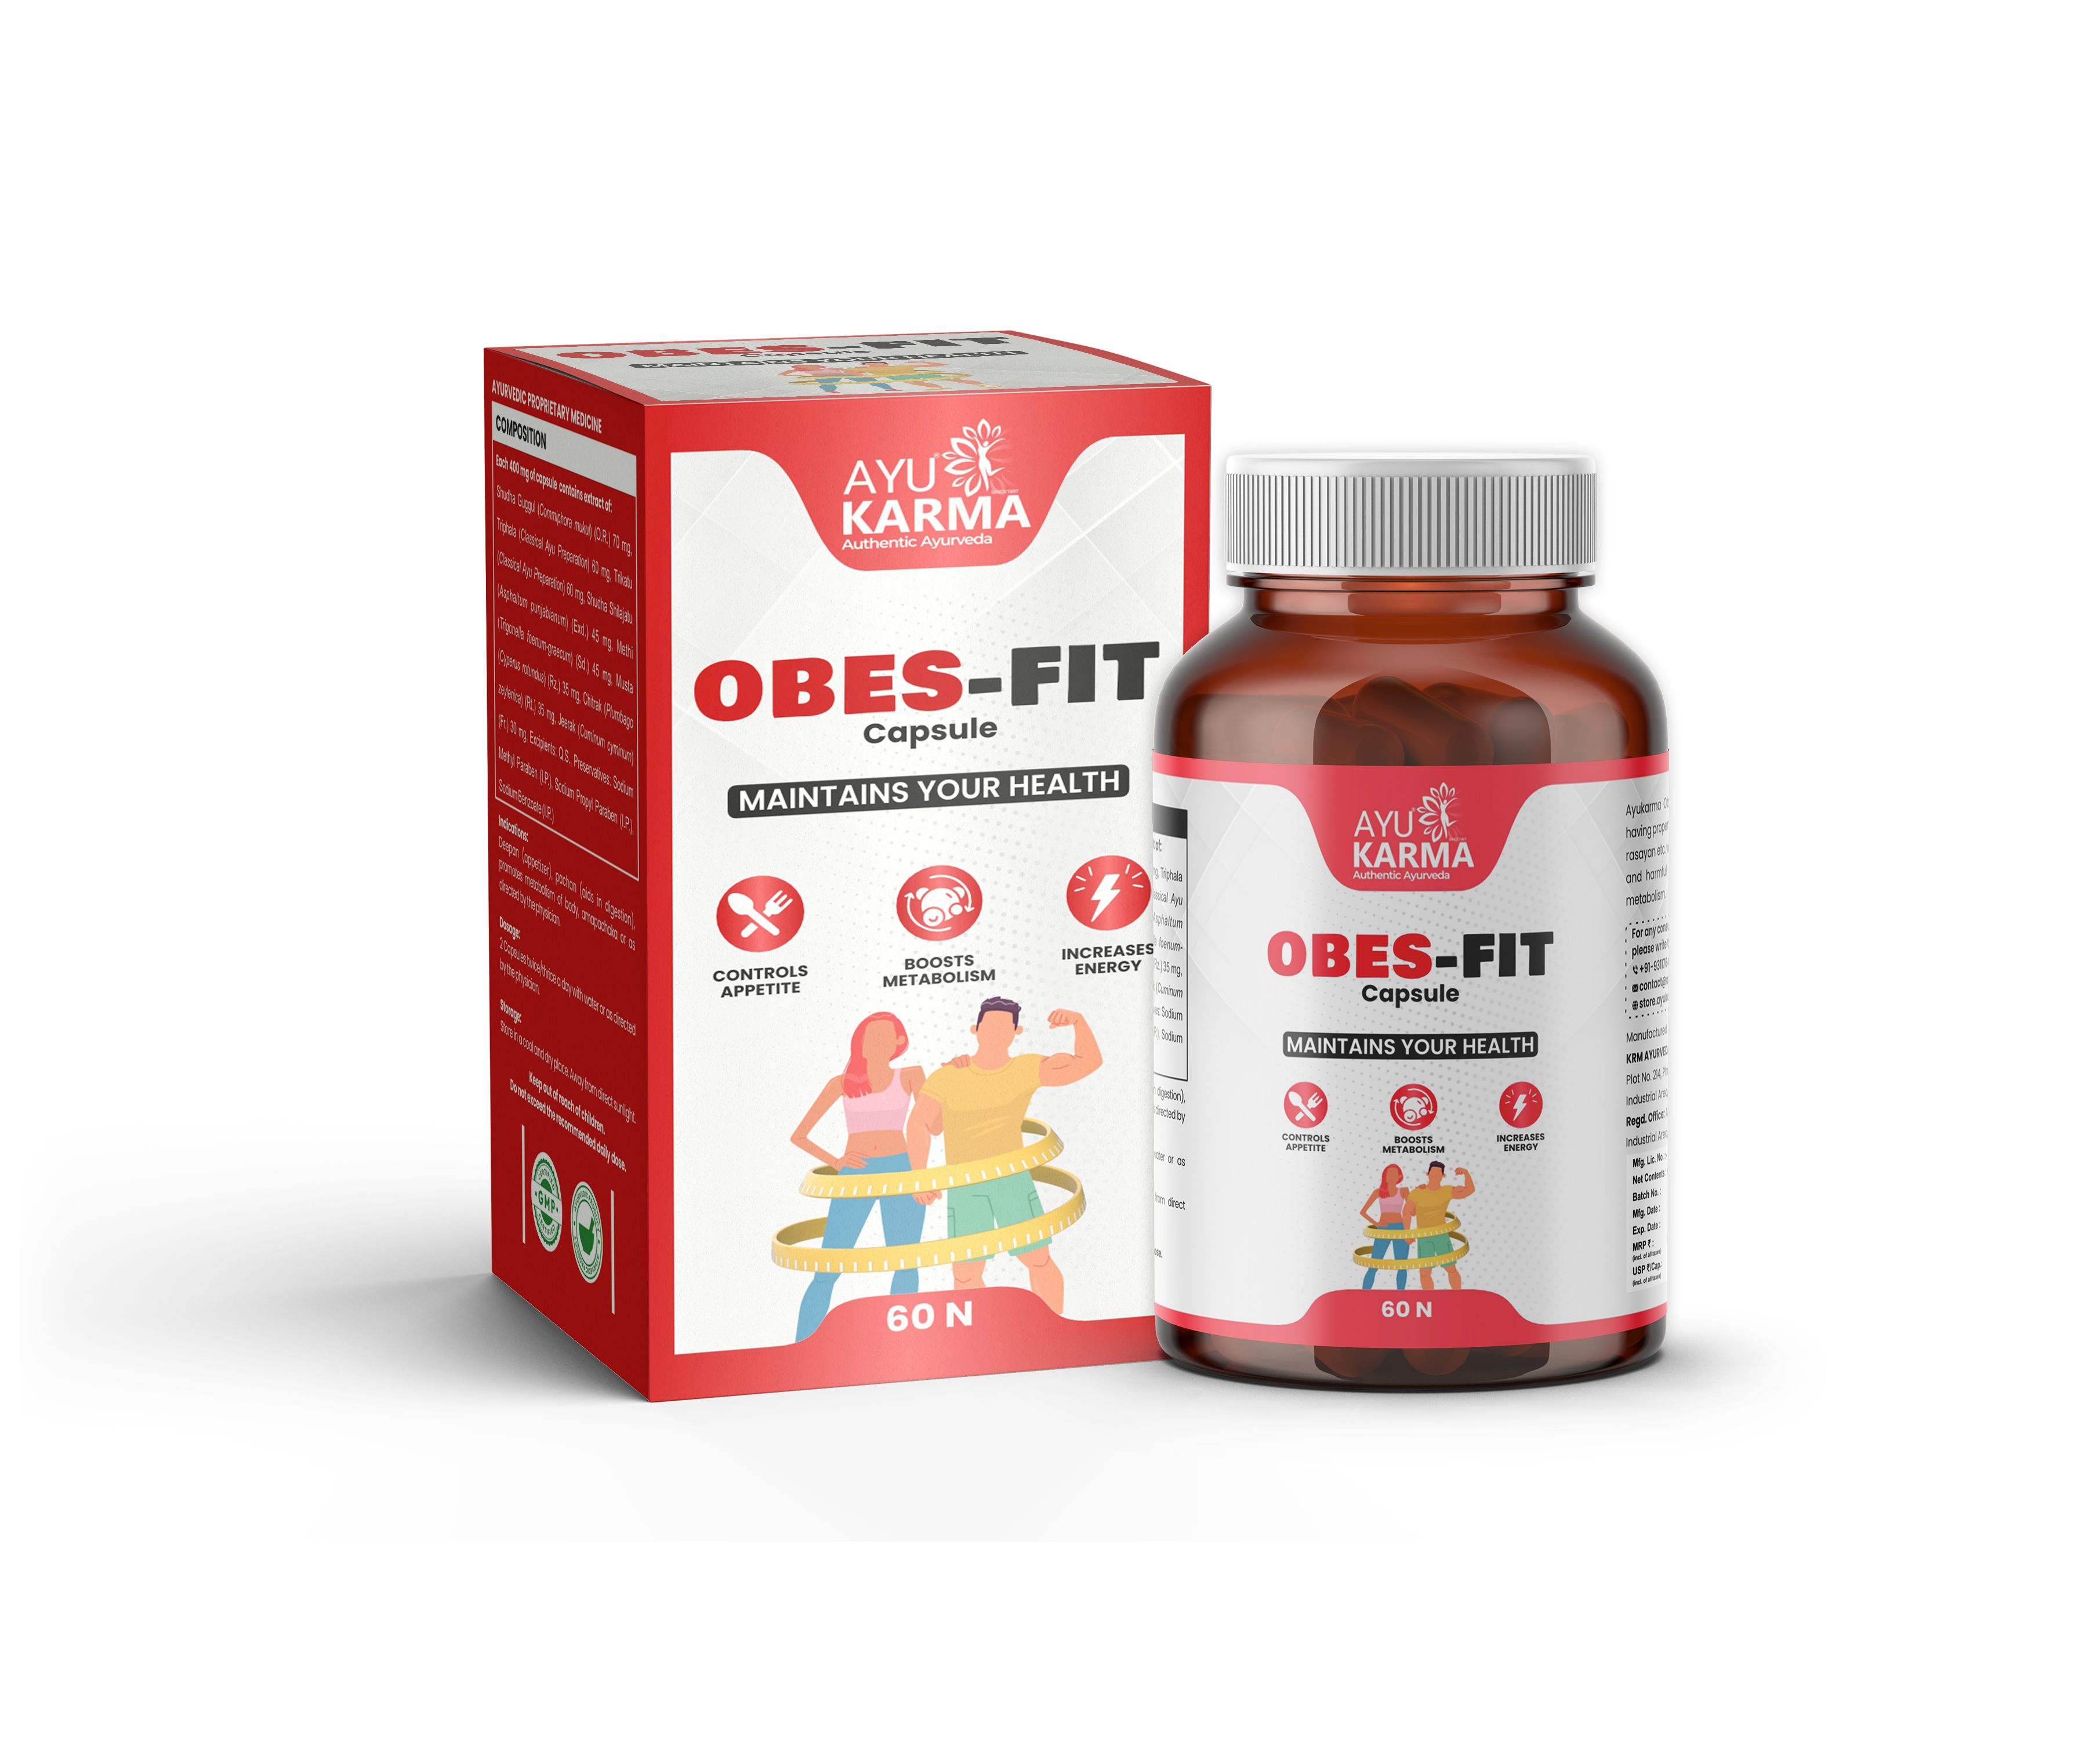 Obes-Fit Capsule